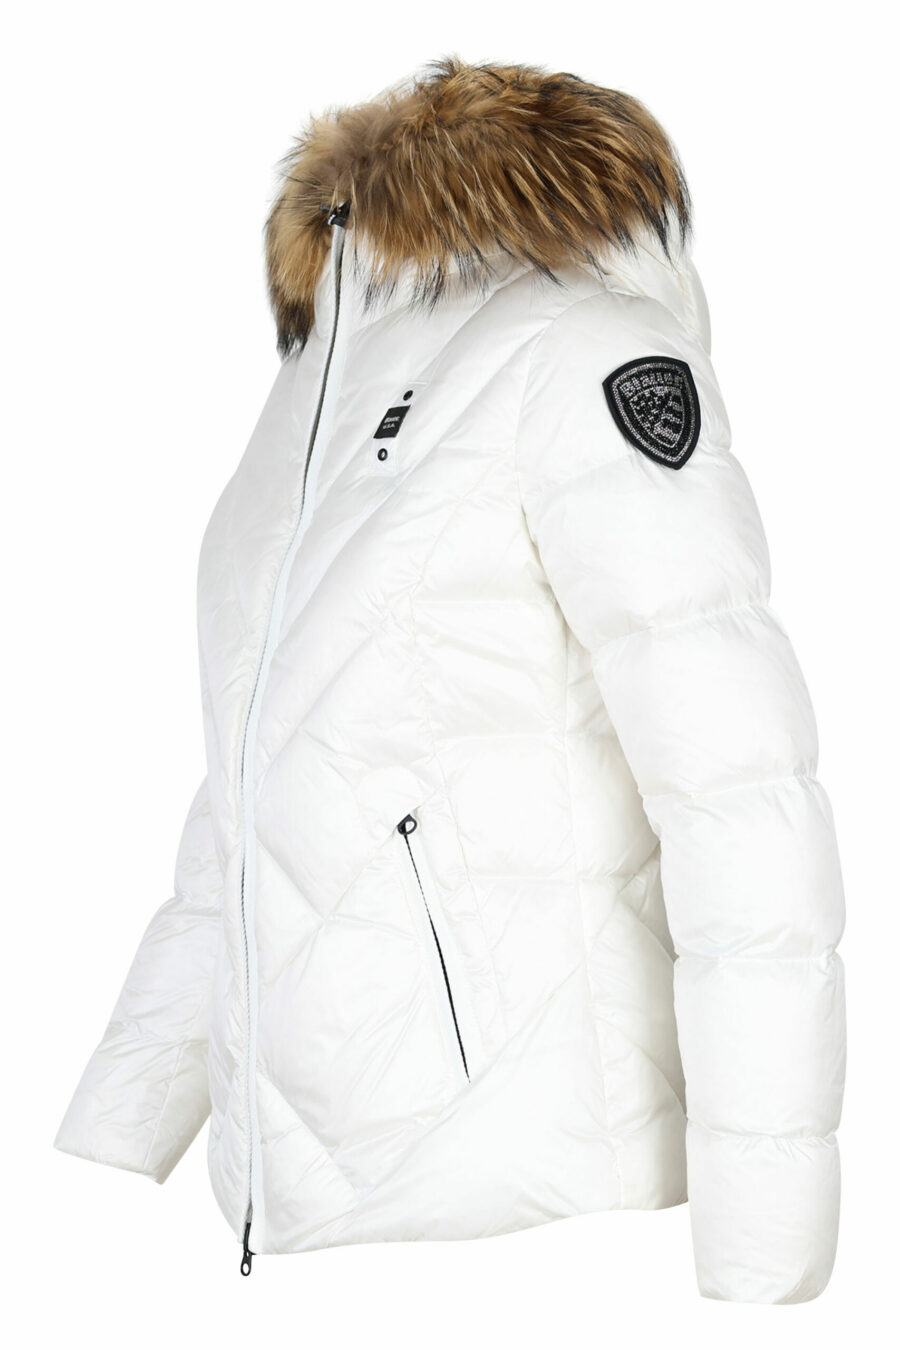 White hooded jacket with fur hood and diagonal lines and beige lining - 8058610678791 2 scaled